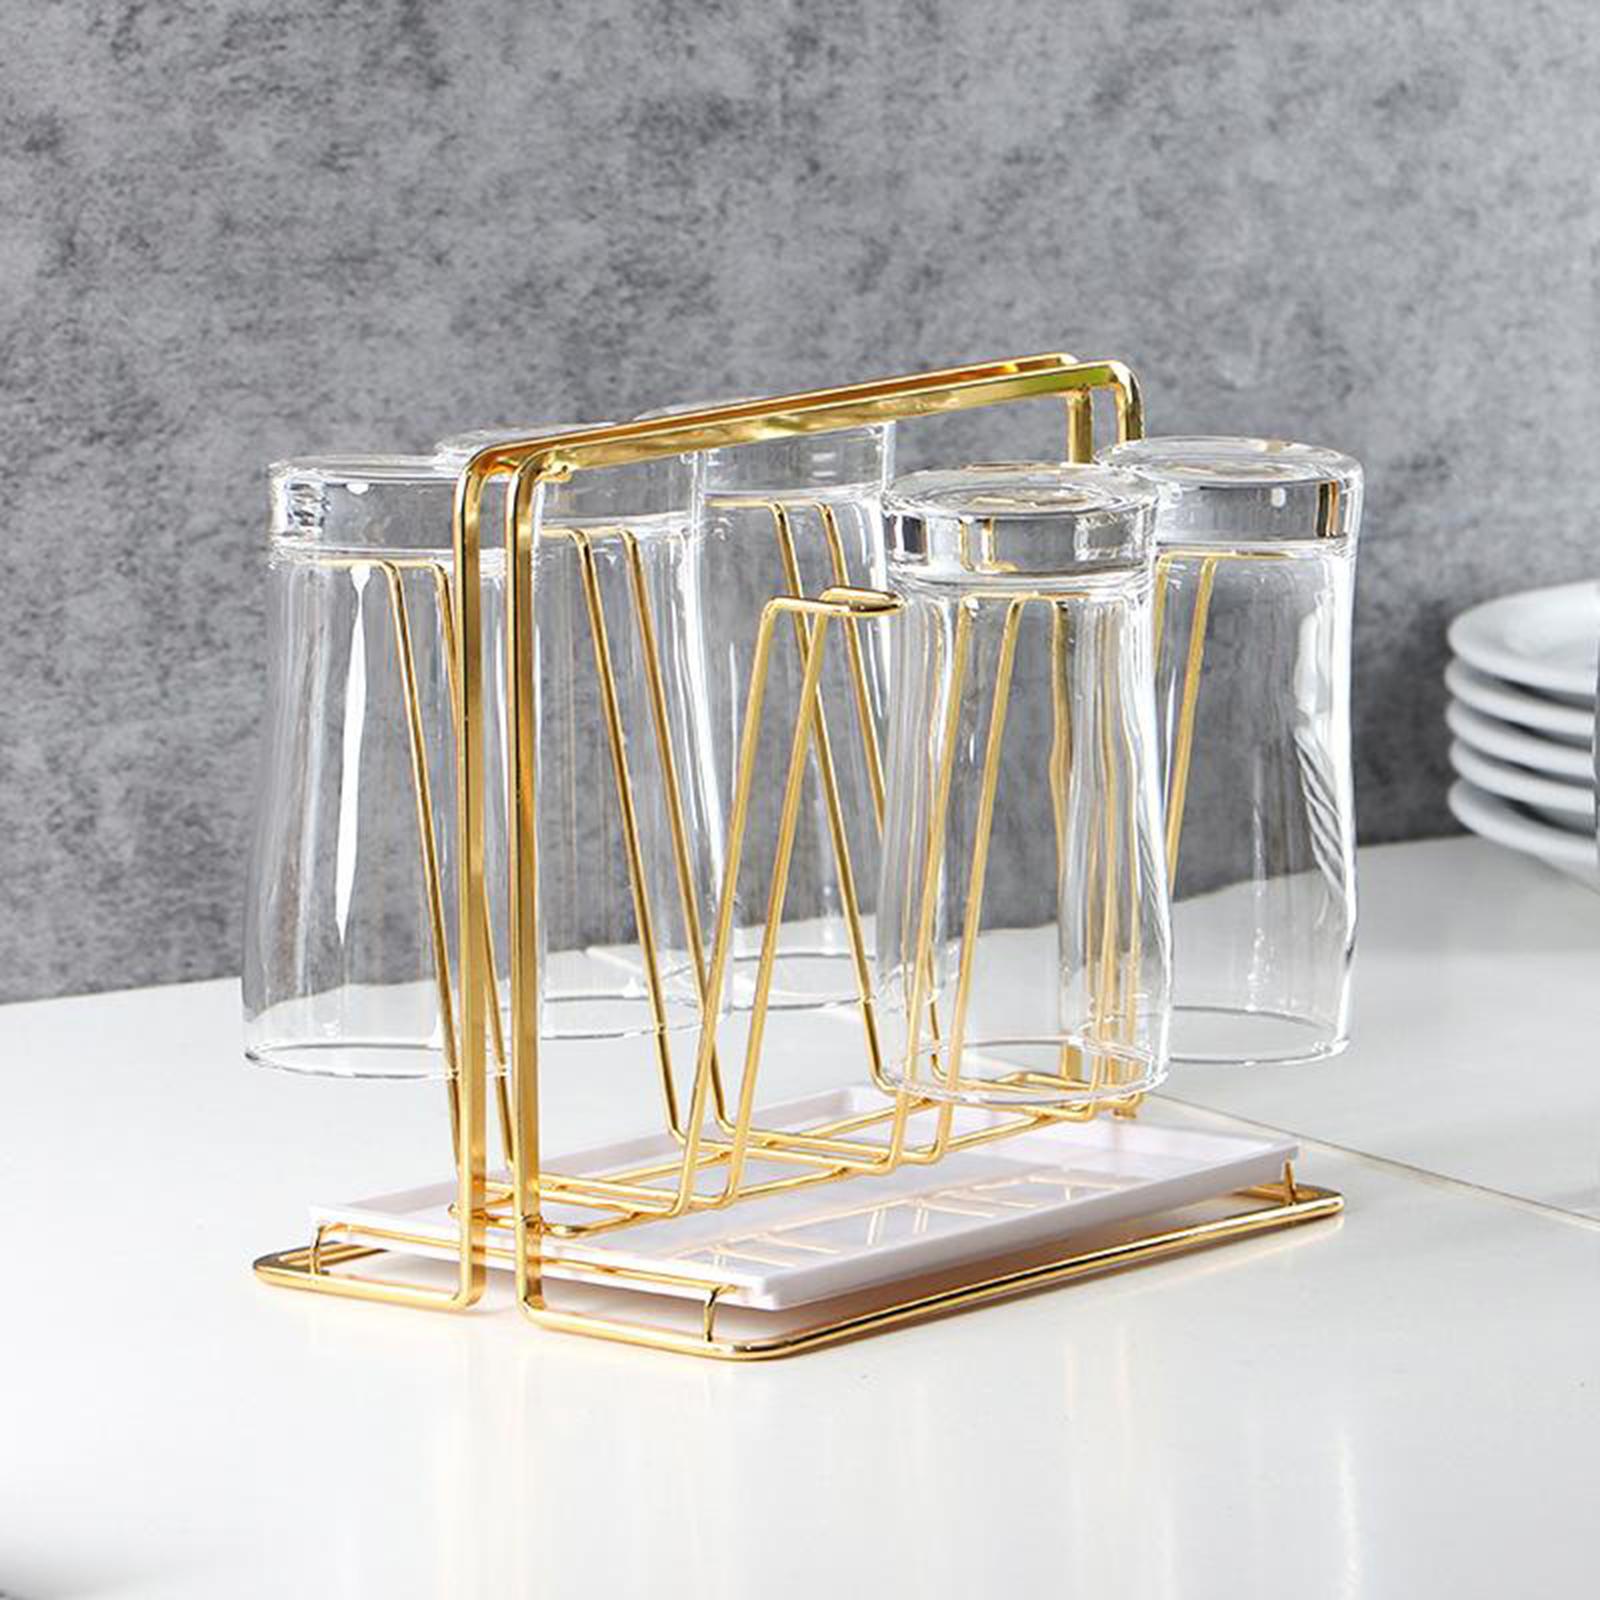 Minimalist Golden Cup Drying Rack Stand Iron 6 Cup Hooks Drainer Holder Tree for Mugs Glasses Bottles Home Kitchen Storage Organizer